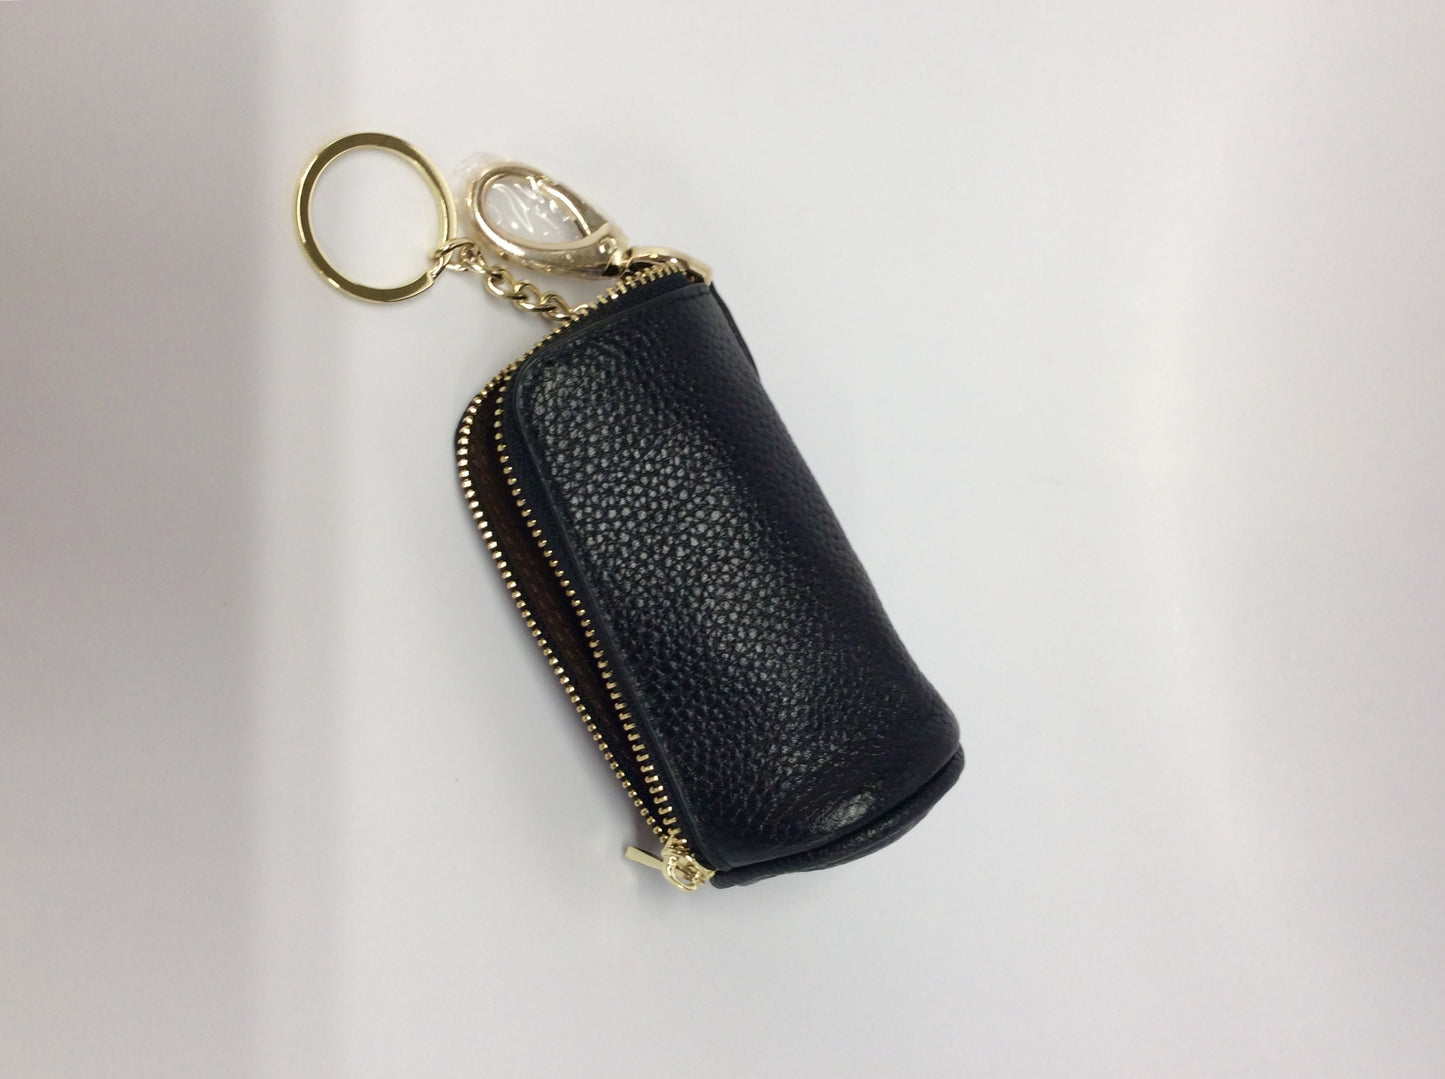 Airpod Leather Keyholder #89-8875